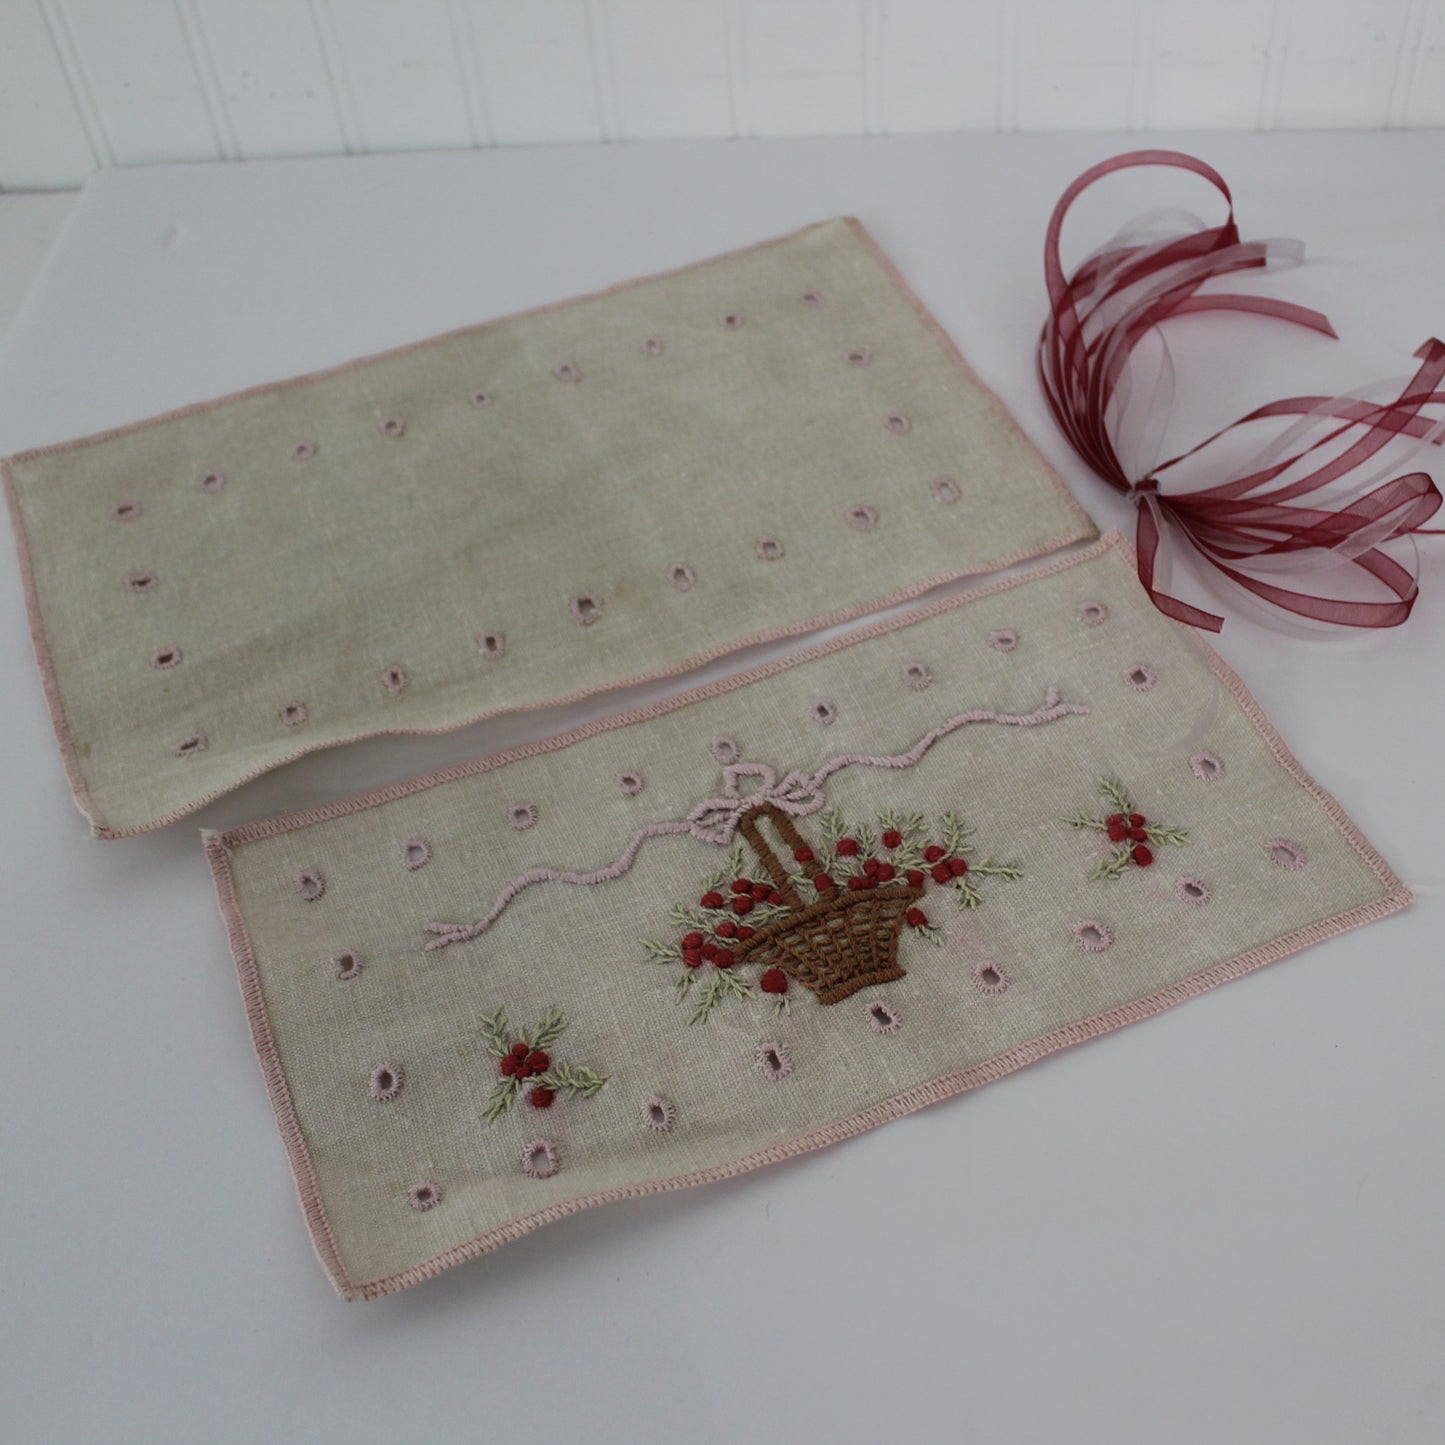 Small Intricately Embroidered Pillow Case Pin Cushion Sachet